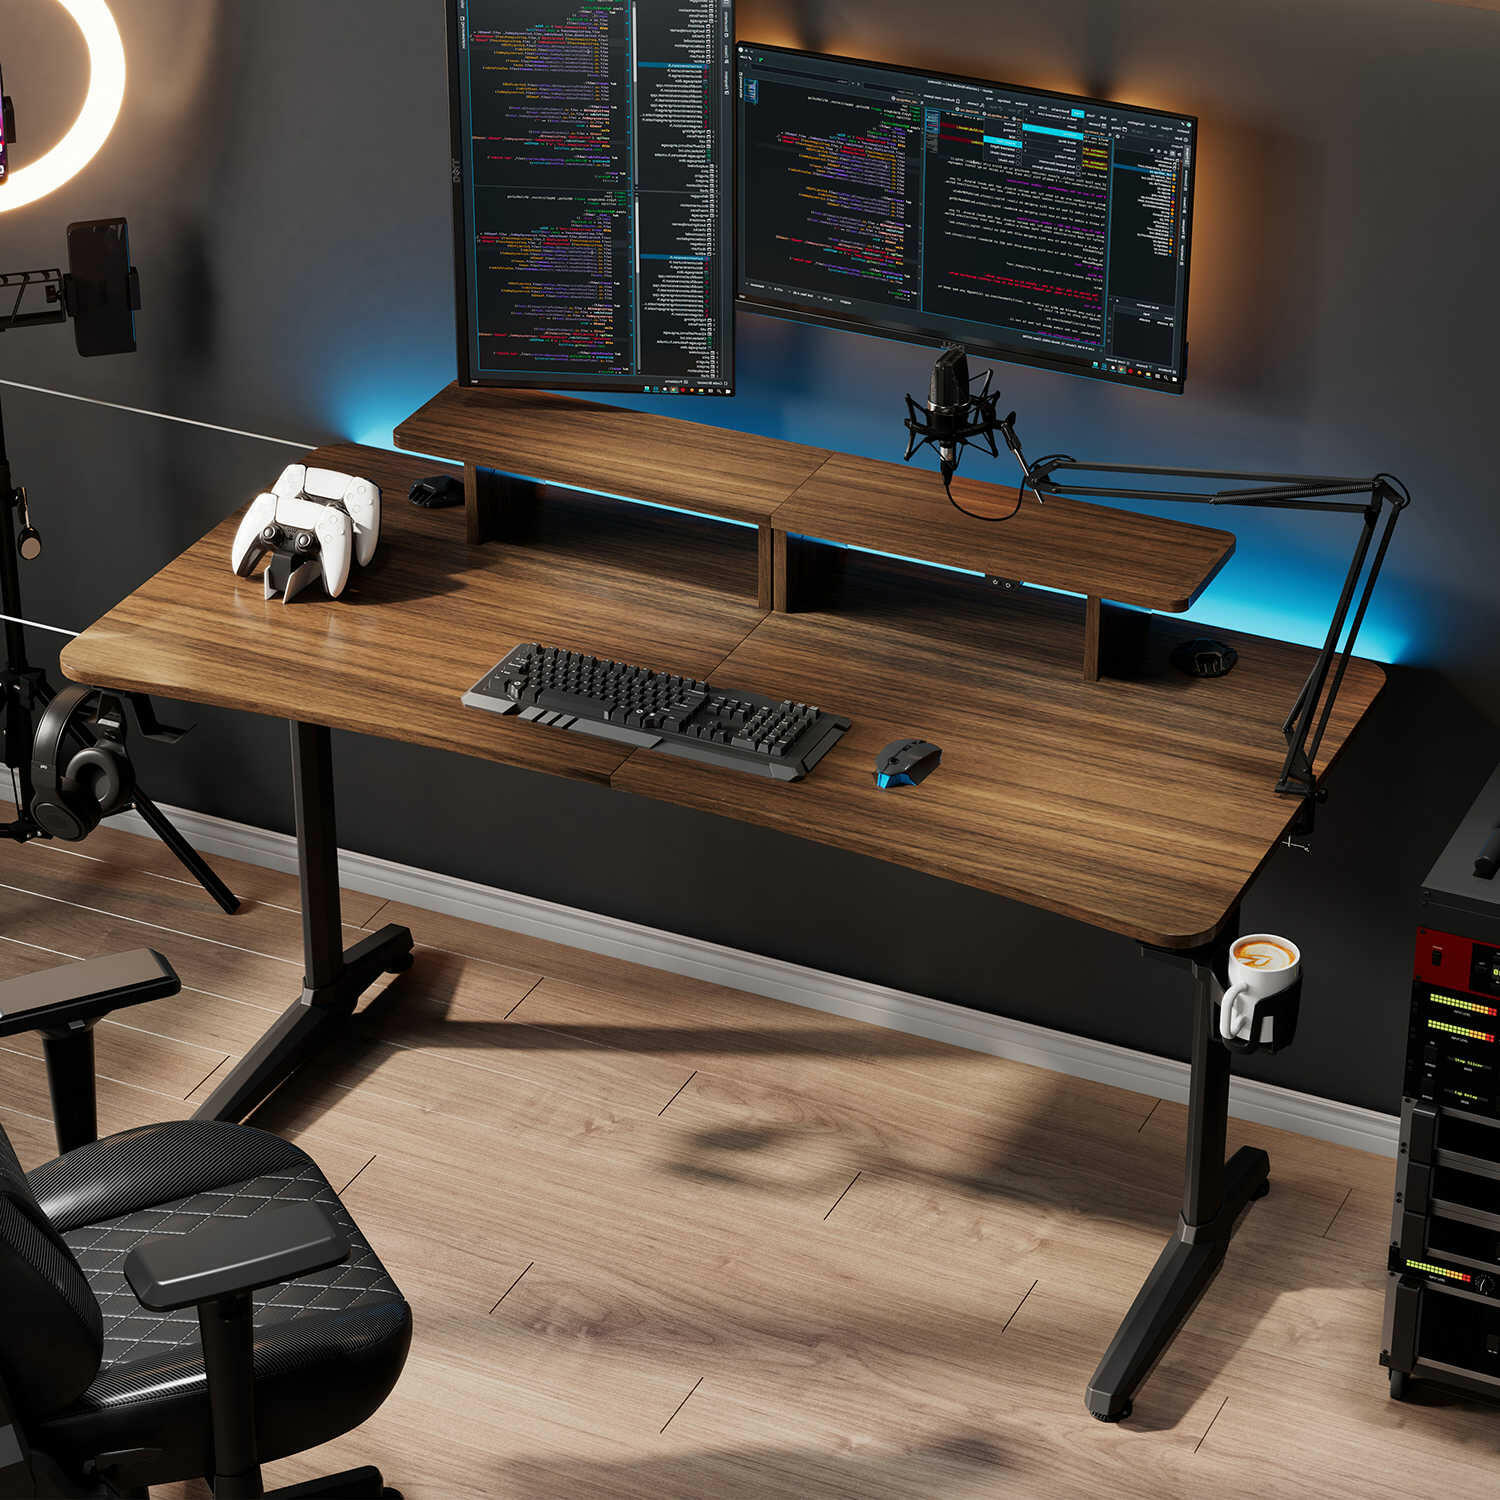 Eureka Ergonomic 55 Inch RGB LED Gaming Desk with Lights Up, PC Computer  Studio Gamer Table I Shaped Home Office Workstation, w Free Mouse Pad,USB